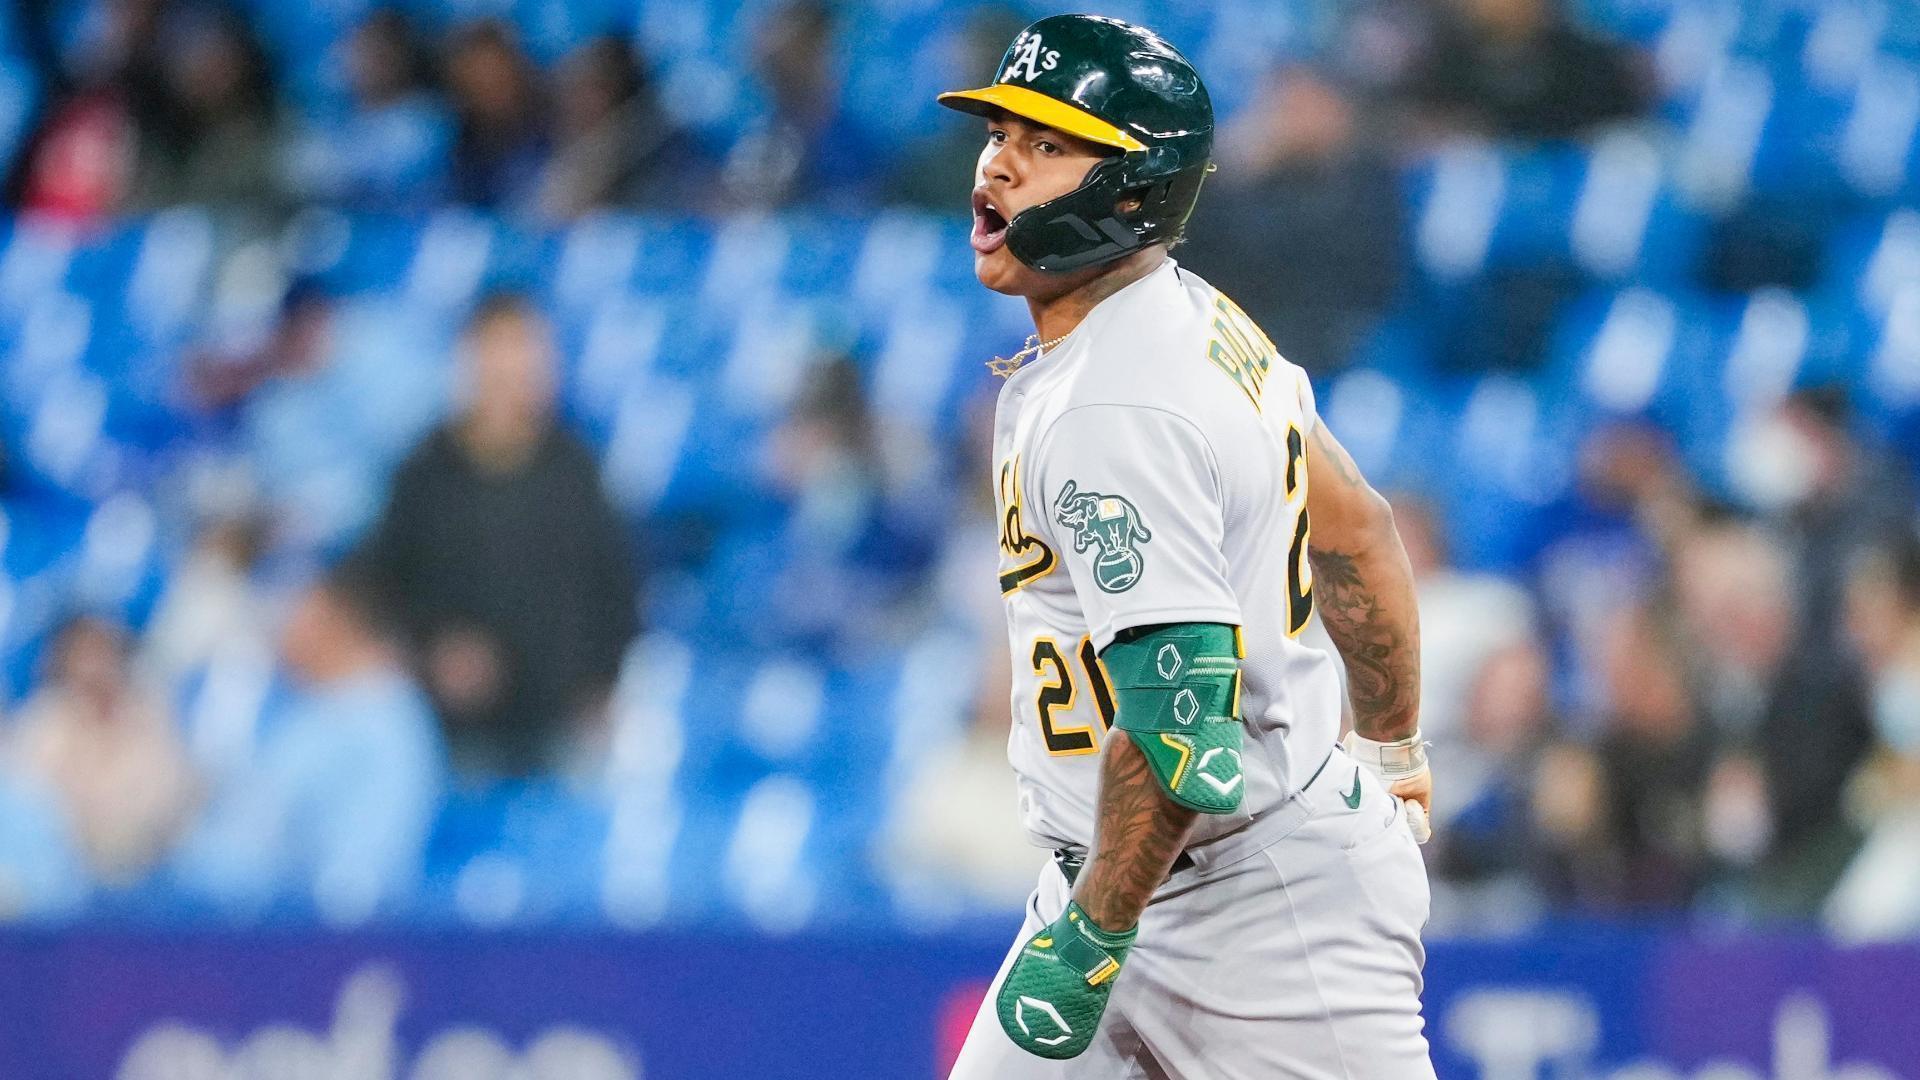 Pache hits game-winning homer in ninth, A's beat Jays 7-5 - ABC30